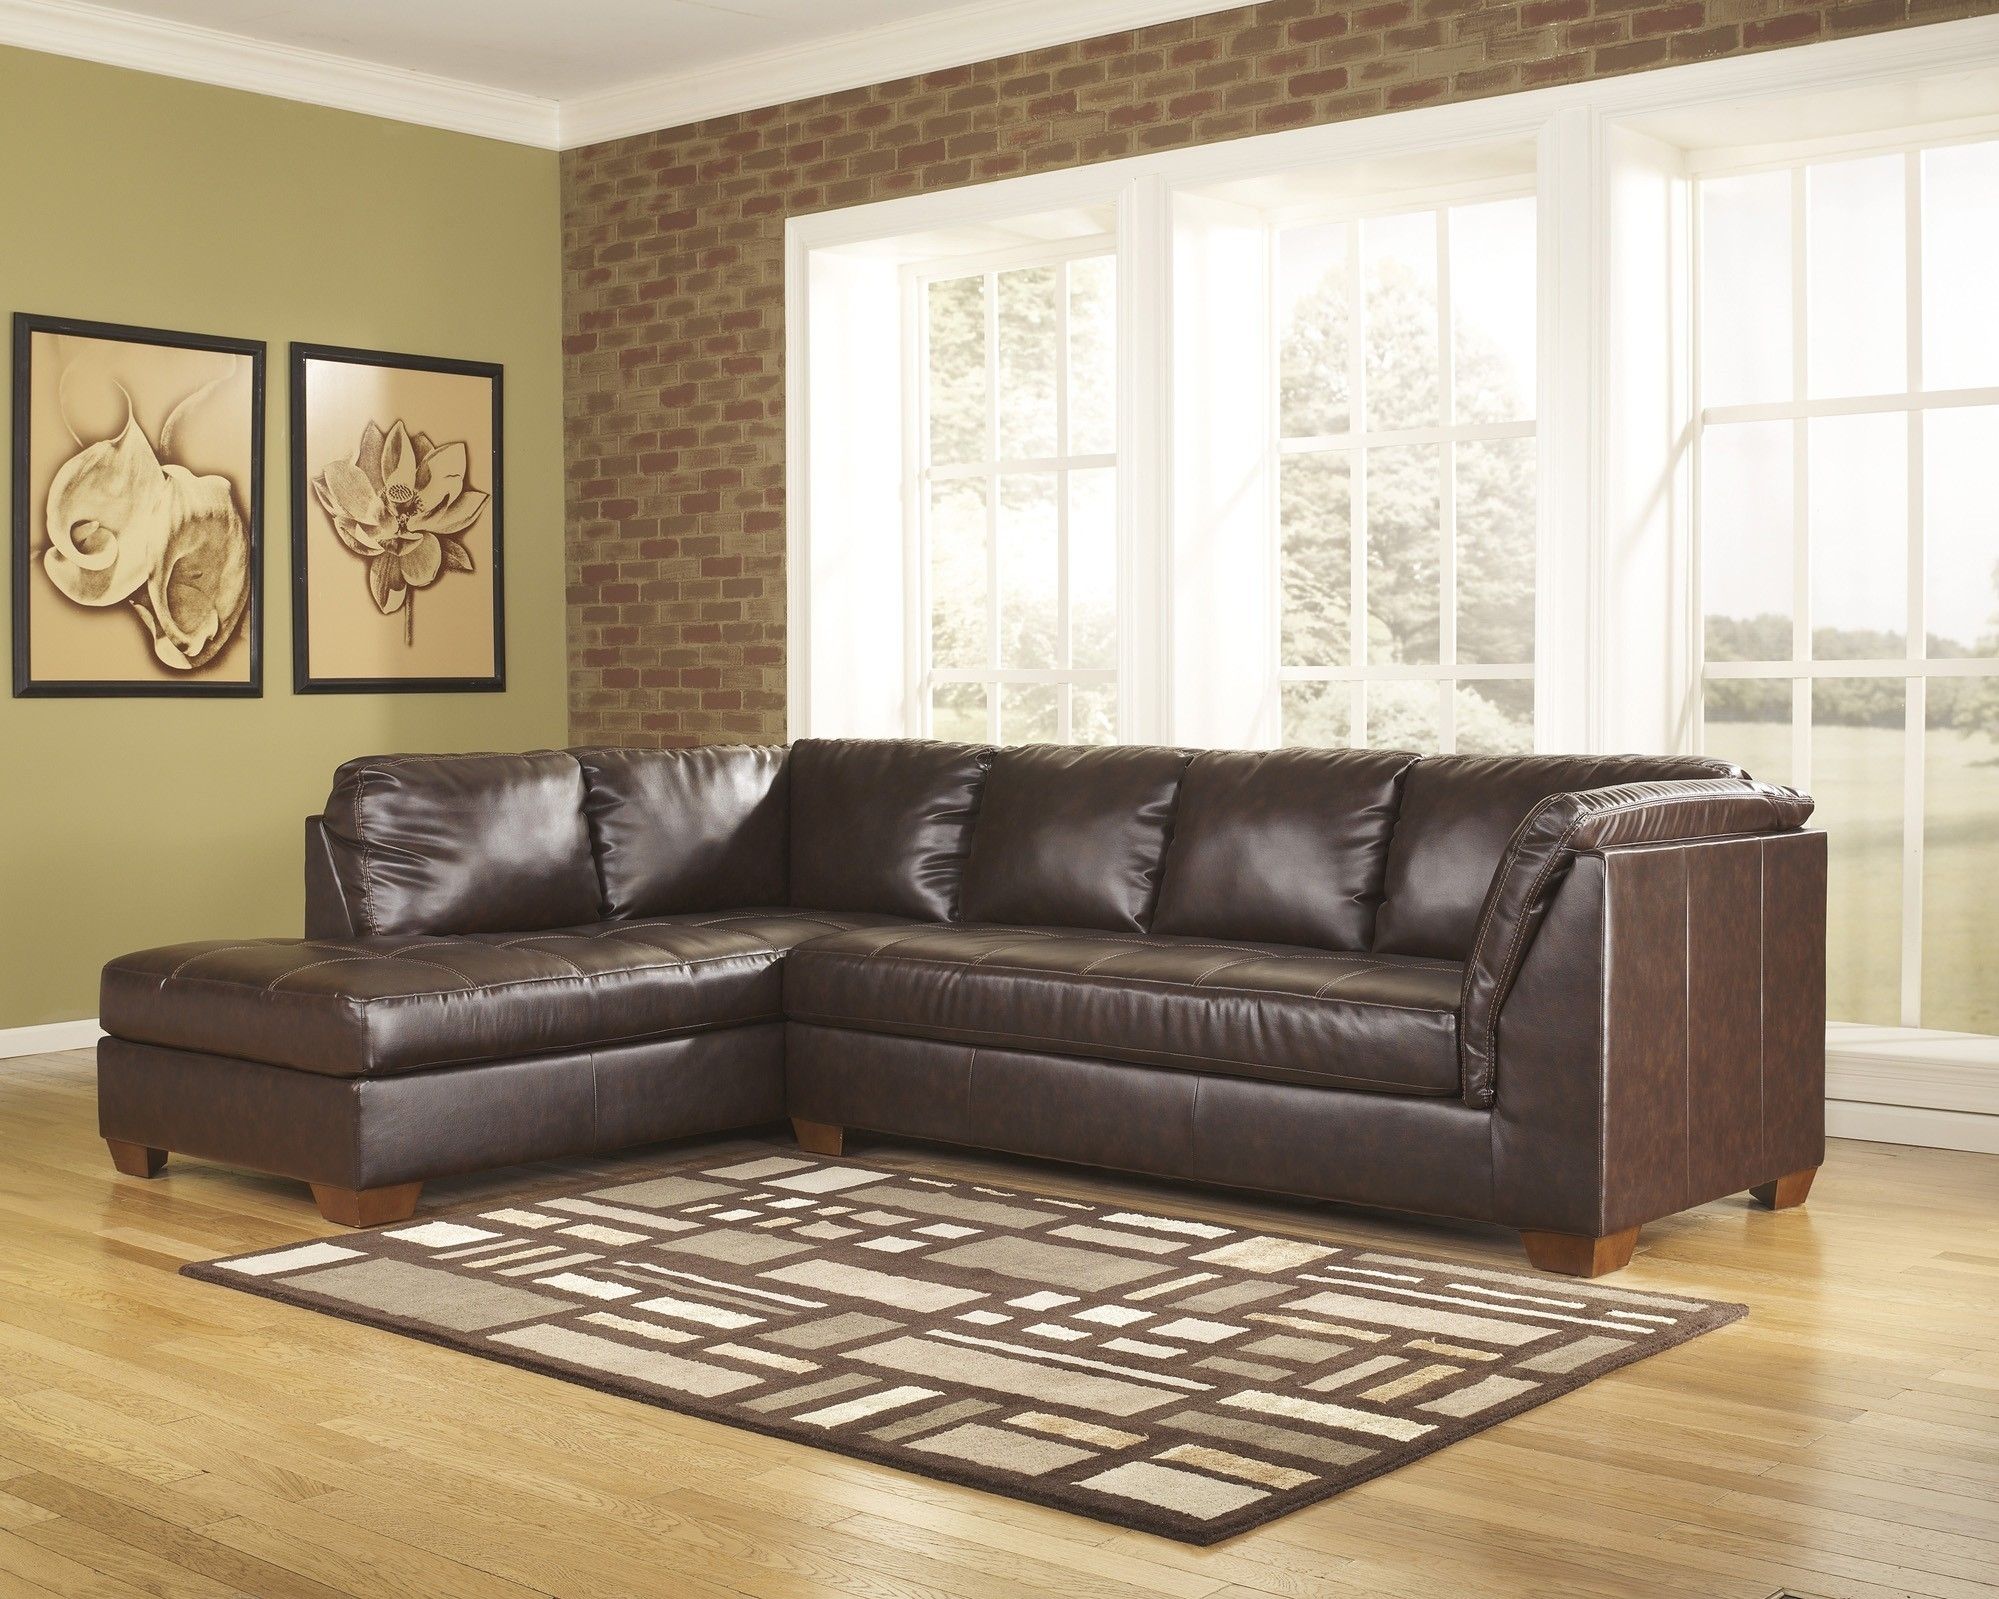 Lovely 2 Piece Sectional Sofa – Buildsimplehome For Evan 2 Piece Sectionals With Raf Chaise (View 18 of 30)